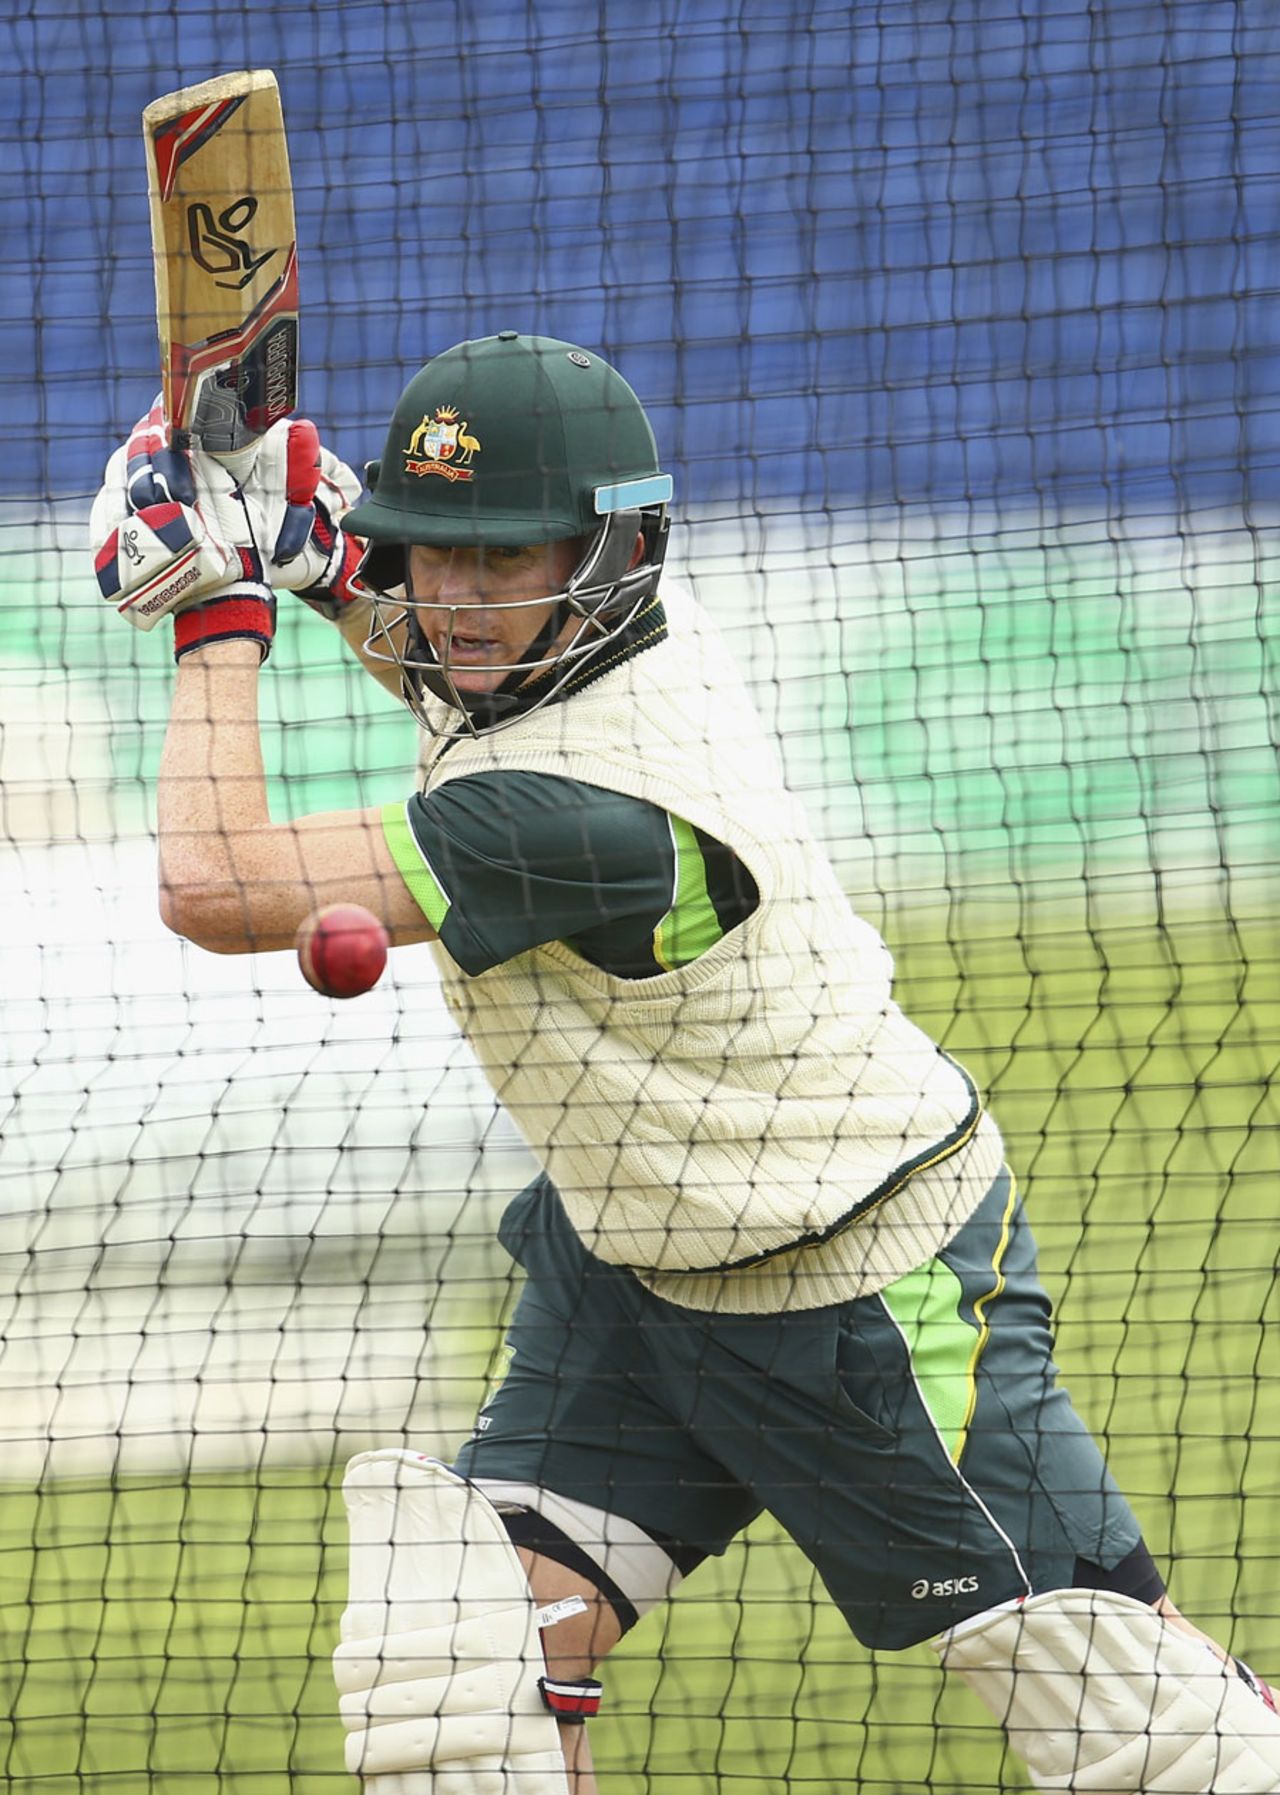 Chris Rogers is expected to return to the top of the order ahead of Shaun Marsh, Cardiff, July 7, 2015